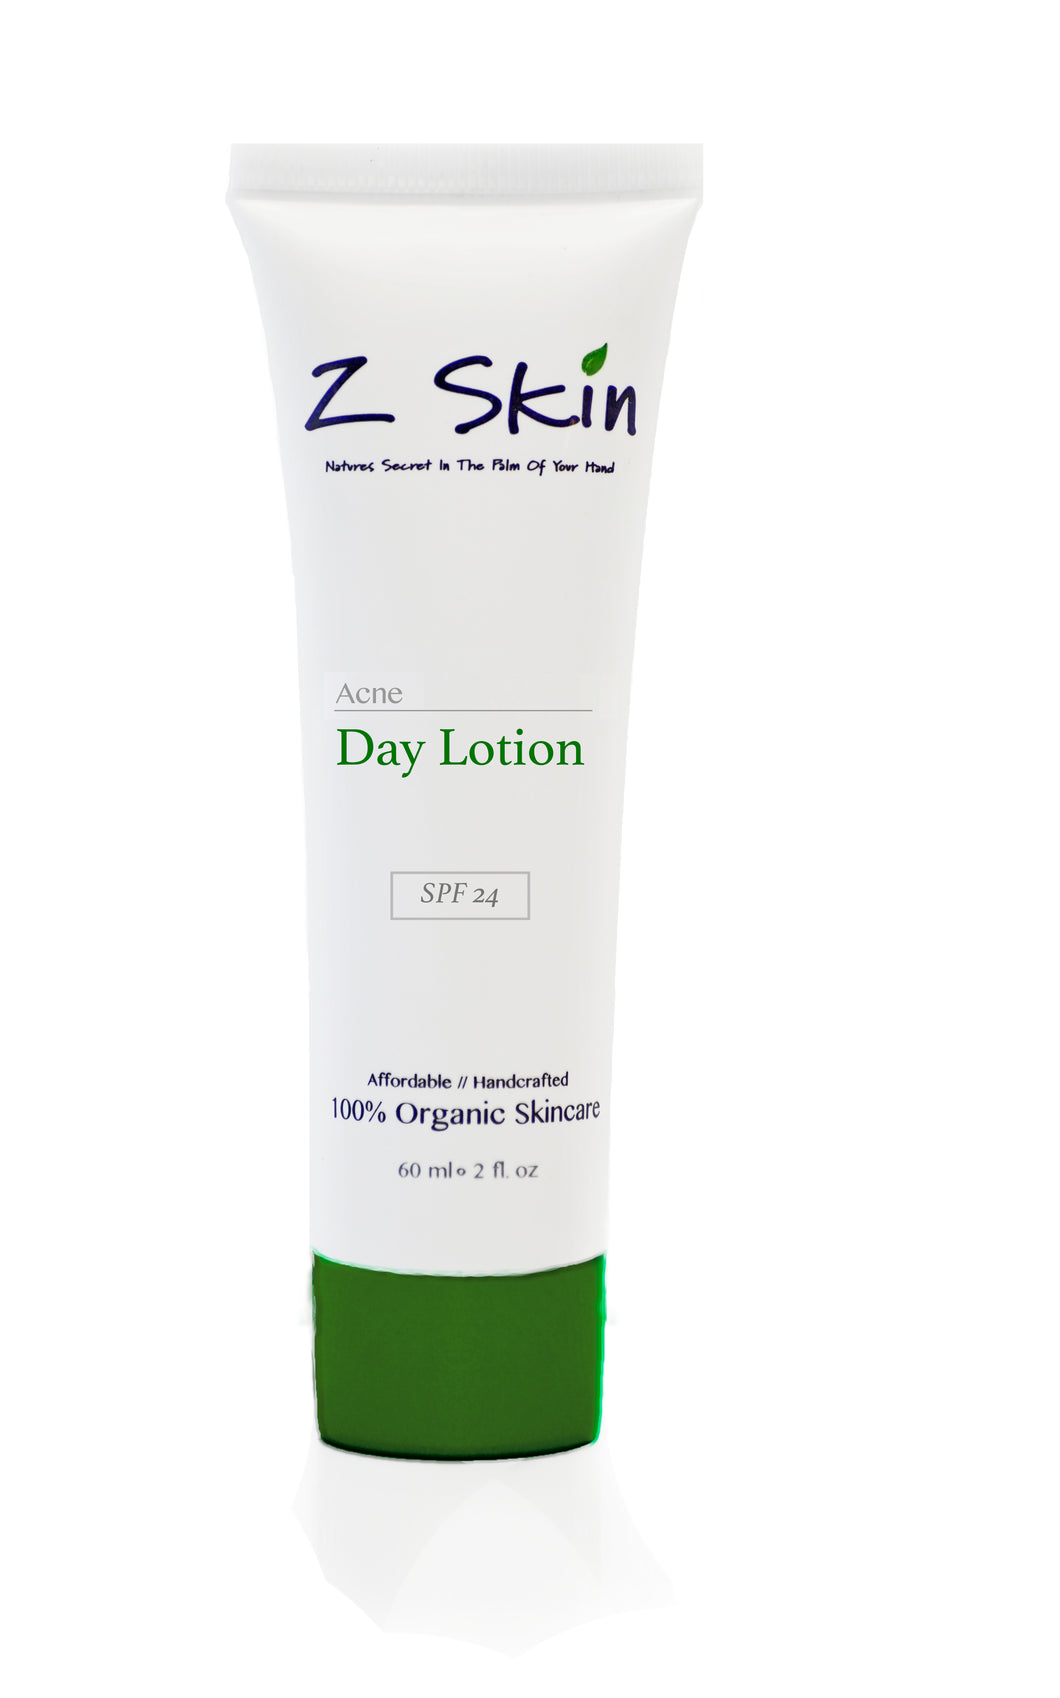 Acne Day Lotion